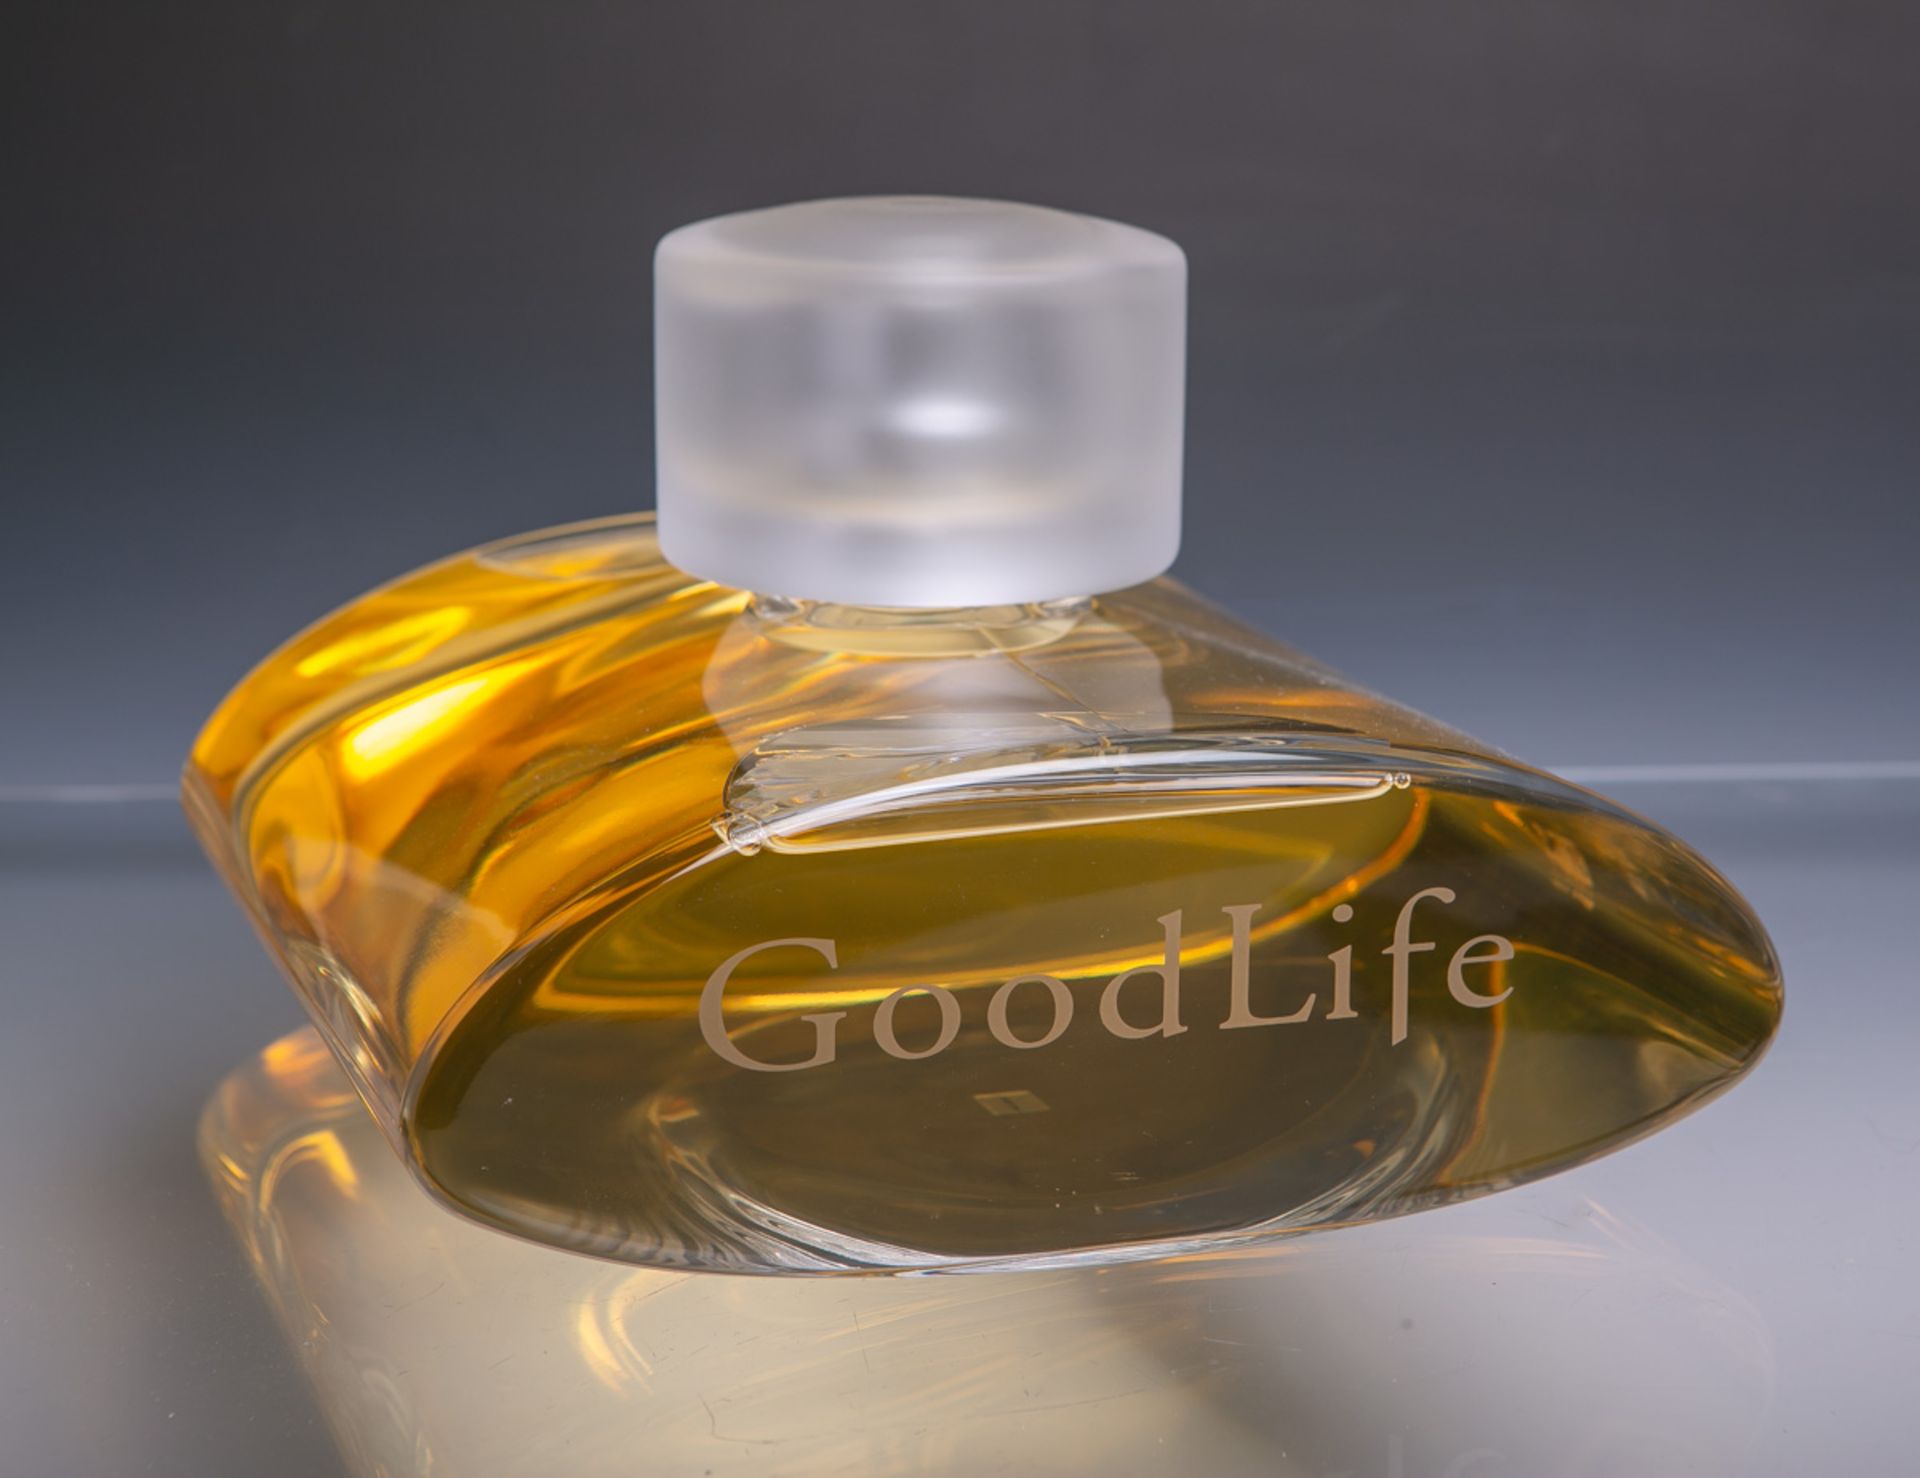 Gross-Factice "GoodLife" (Davidoff, Made in France) - Image 2 of 2